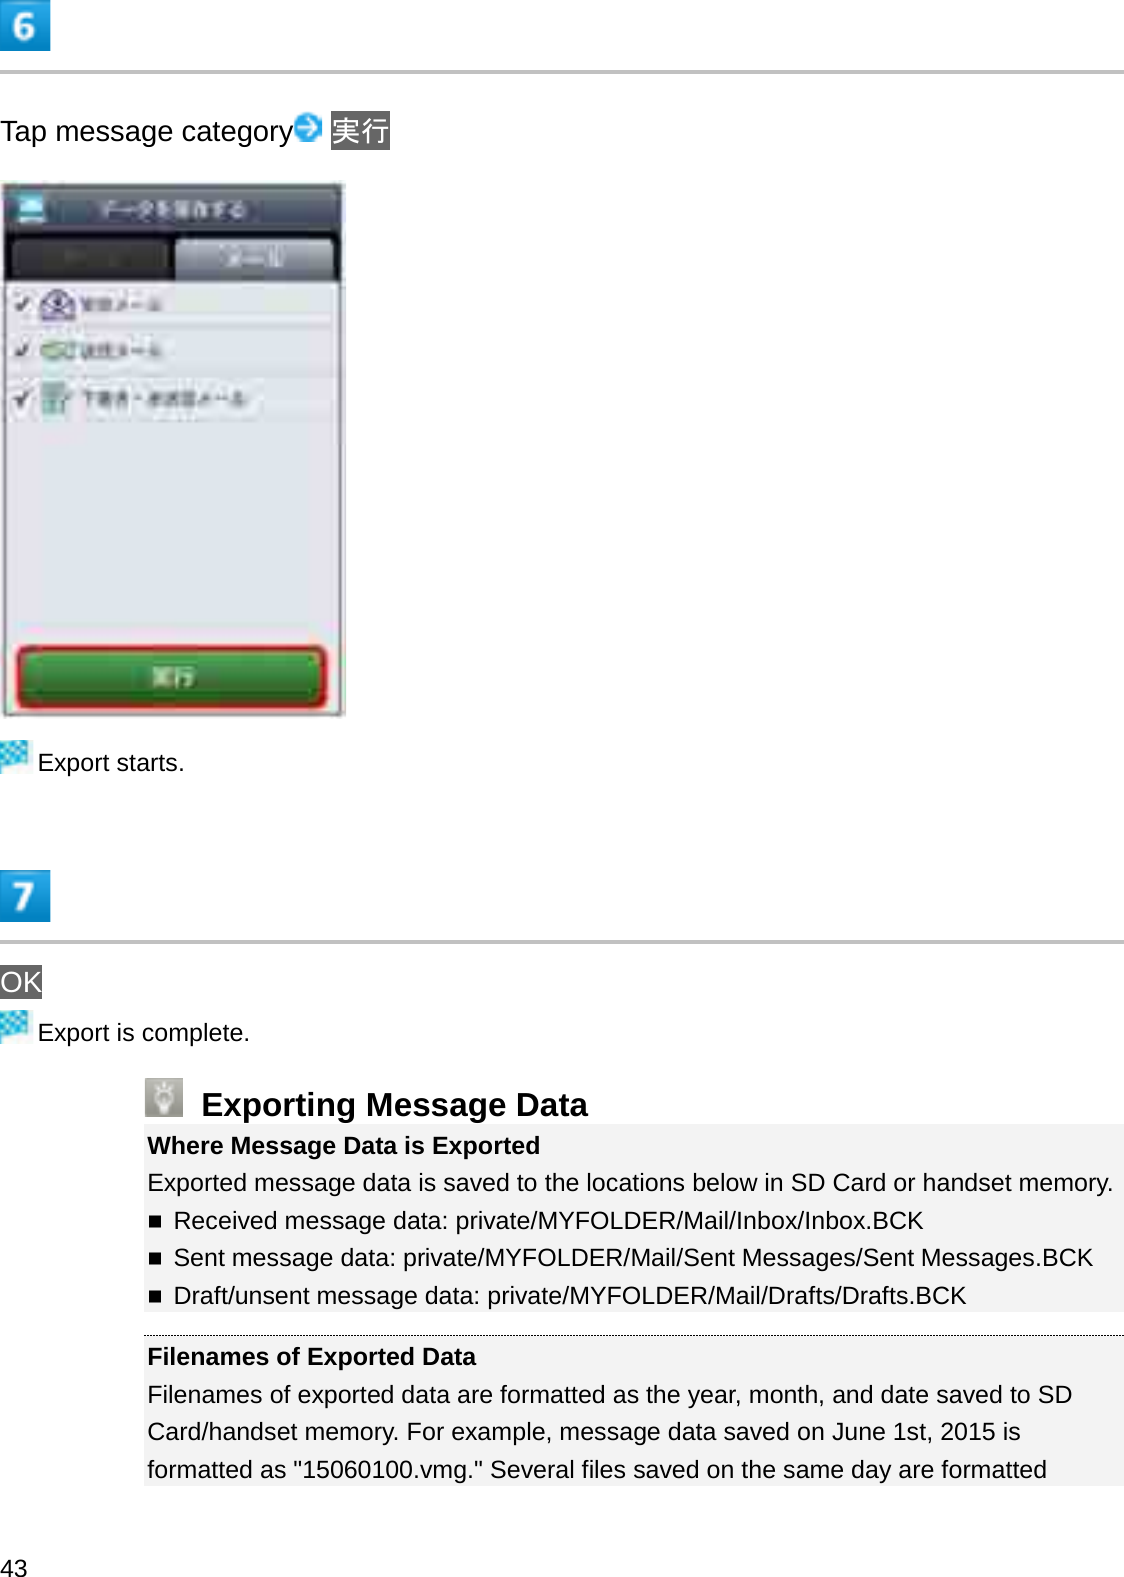 Tap message category ᐇ⾜Export starts.OKExport is complete.Exporting Message DataWhere Message Data is ExportedExported message data is saved to the locations below in SD Card or handset memory.Received message data: private/MYFOLDER/Mail/Inbox/Inbox.BCKSent message data: private/MYFOLDER/Mail/Sent Messages/Sent Messages.BCKDraft/unsent message data: private/MYFOLDER/Mail/Drafts/Drafts.BCKFilenames of Exported DataFilenames of exported data are formatted as the year, month, and date saved to SD Card/handset memory. For example, message data saved on June 1st, 2015 is formatted as &quot;15060100.vmg.&quot; Several files saved on the same day are formatted 43